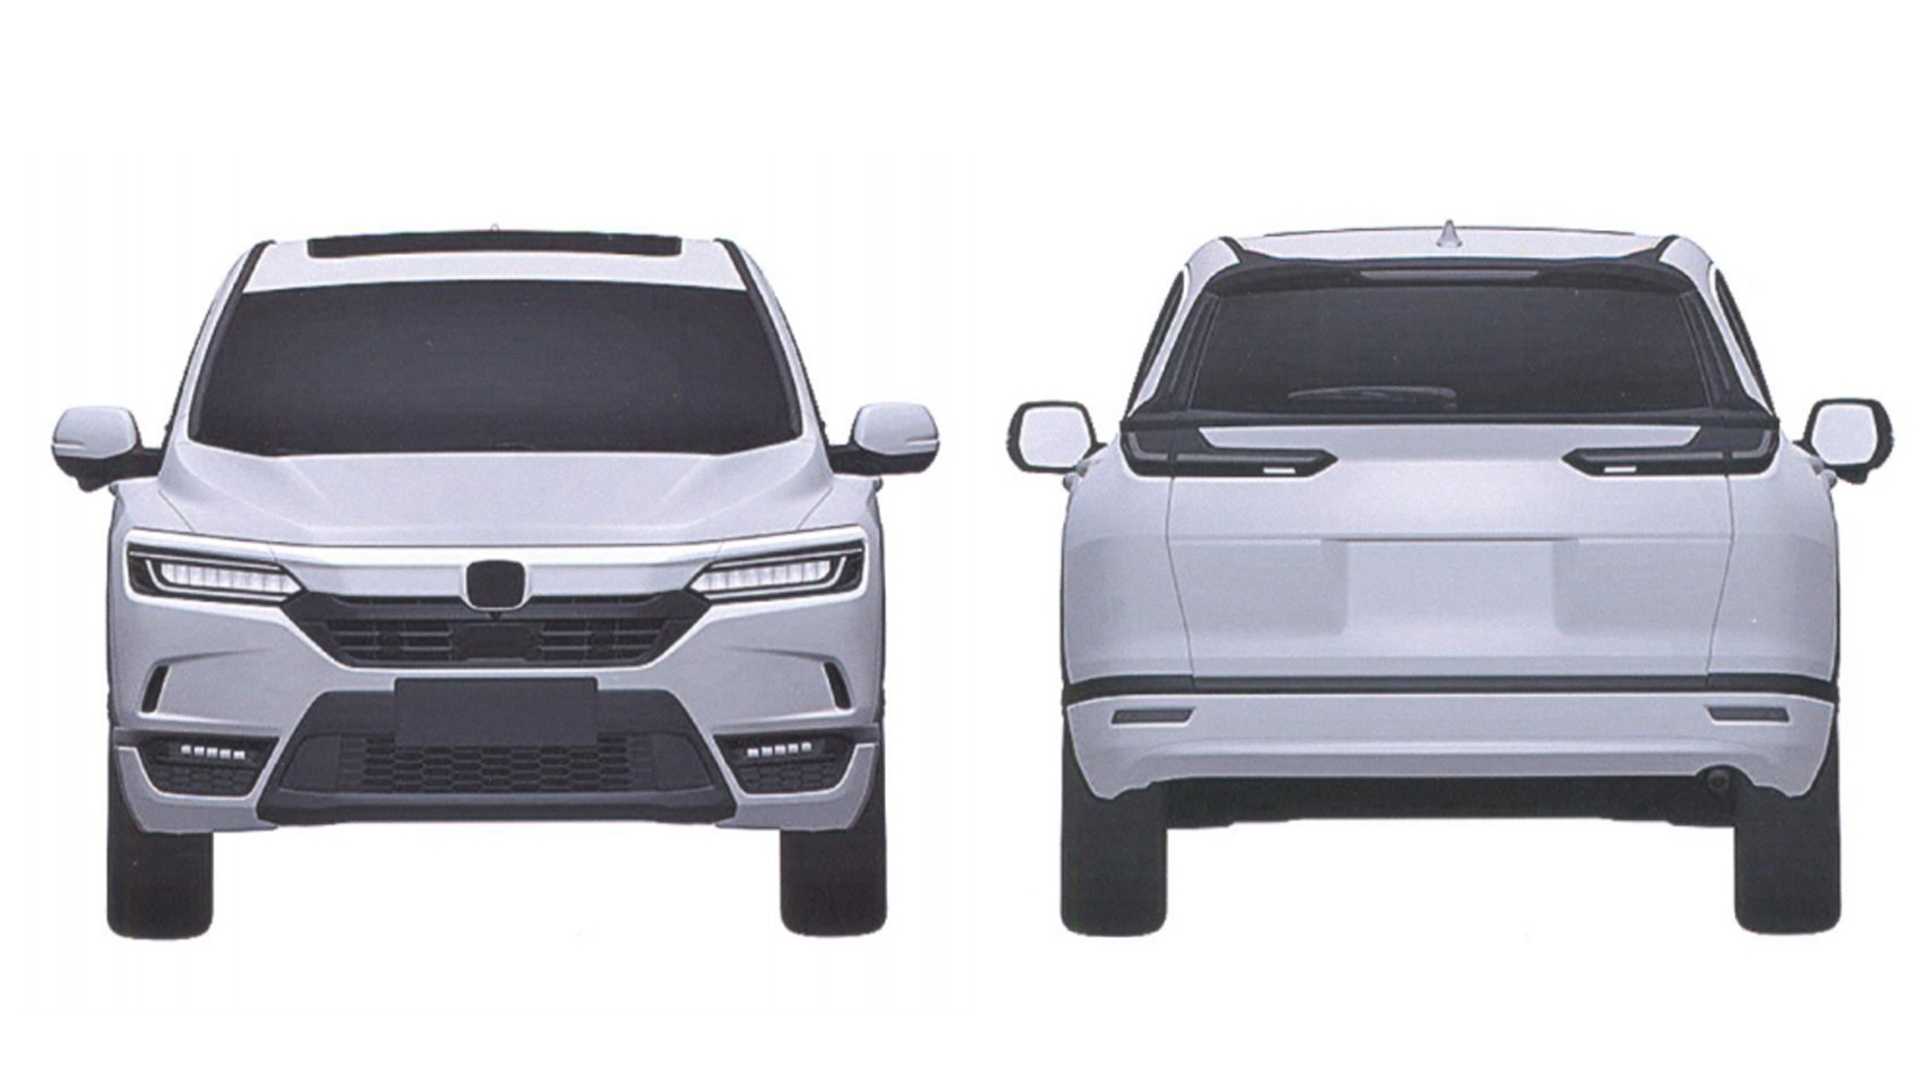 Image 2 Details About Are These Patent Image Of The Next Gen 2023 Honda CR V? Not So Simple News Photo